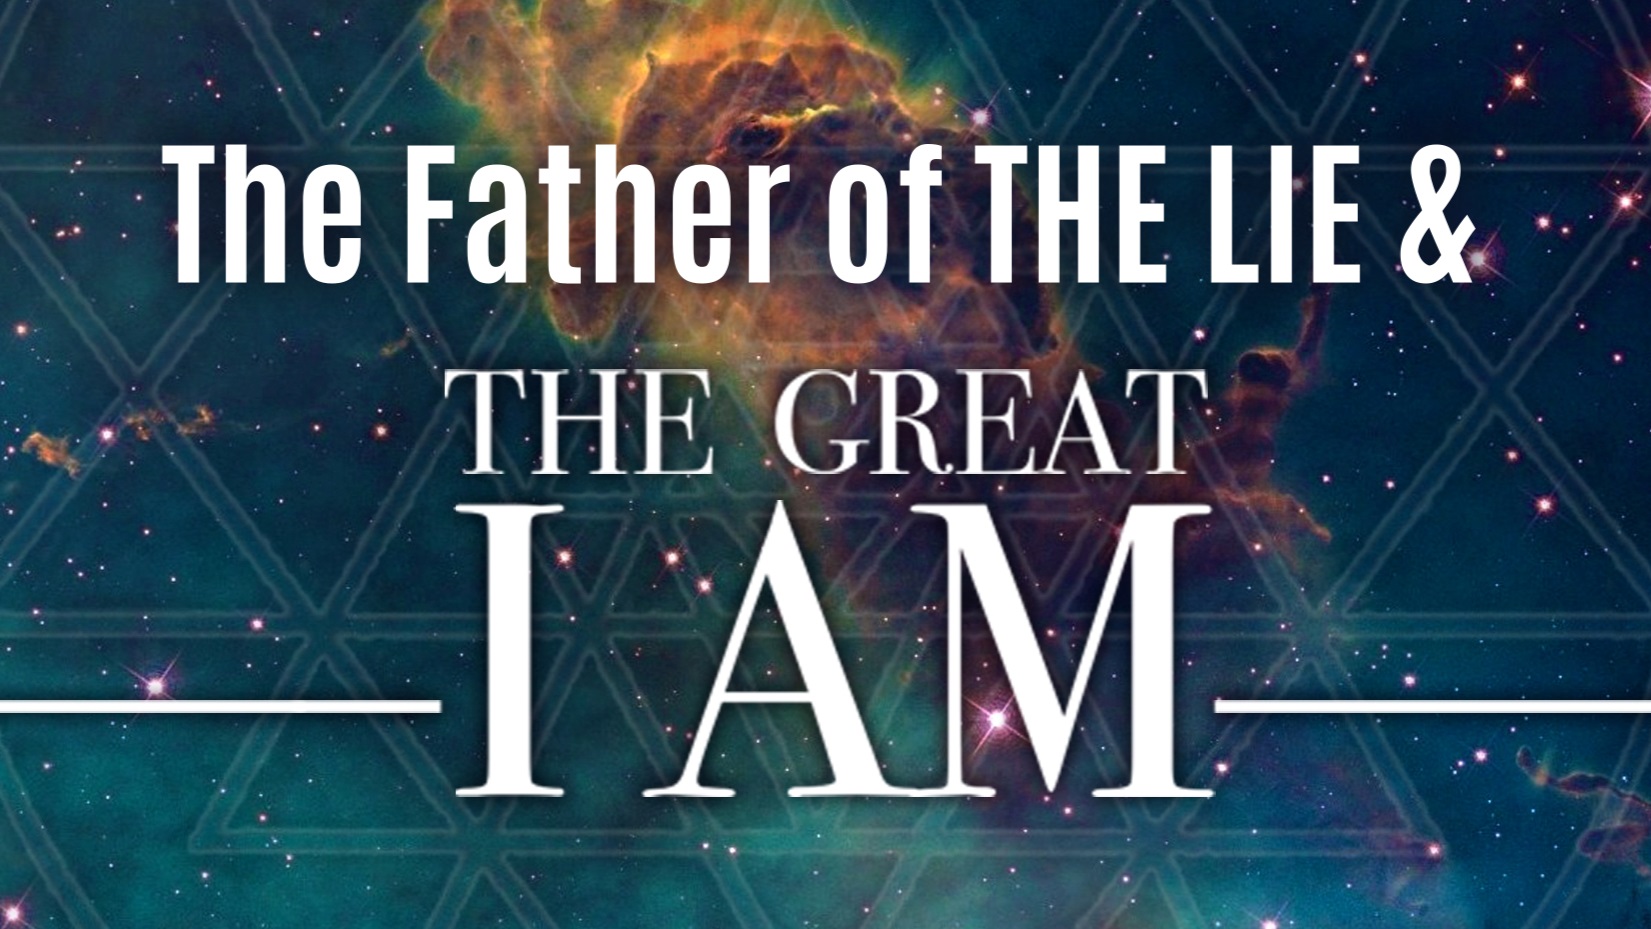 The Father of the Lie and the Great ‘I AM’ (John 8.44-59)